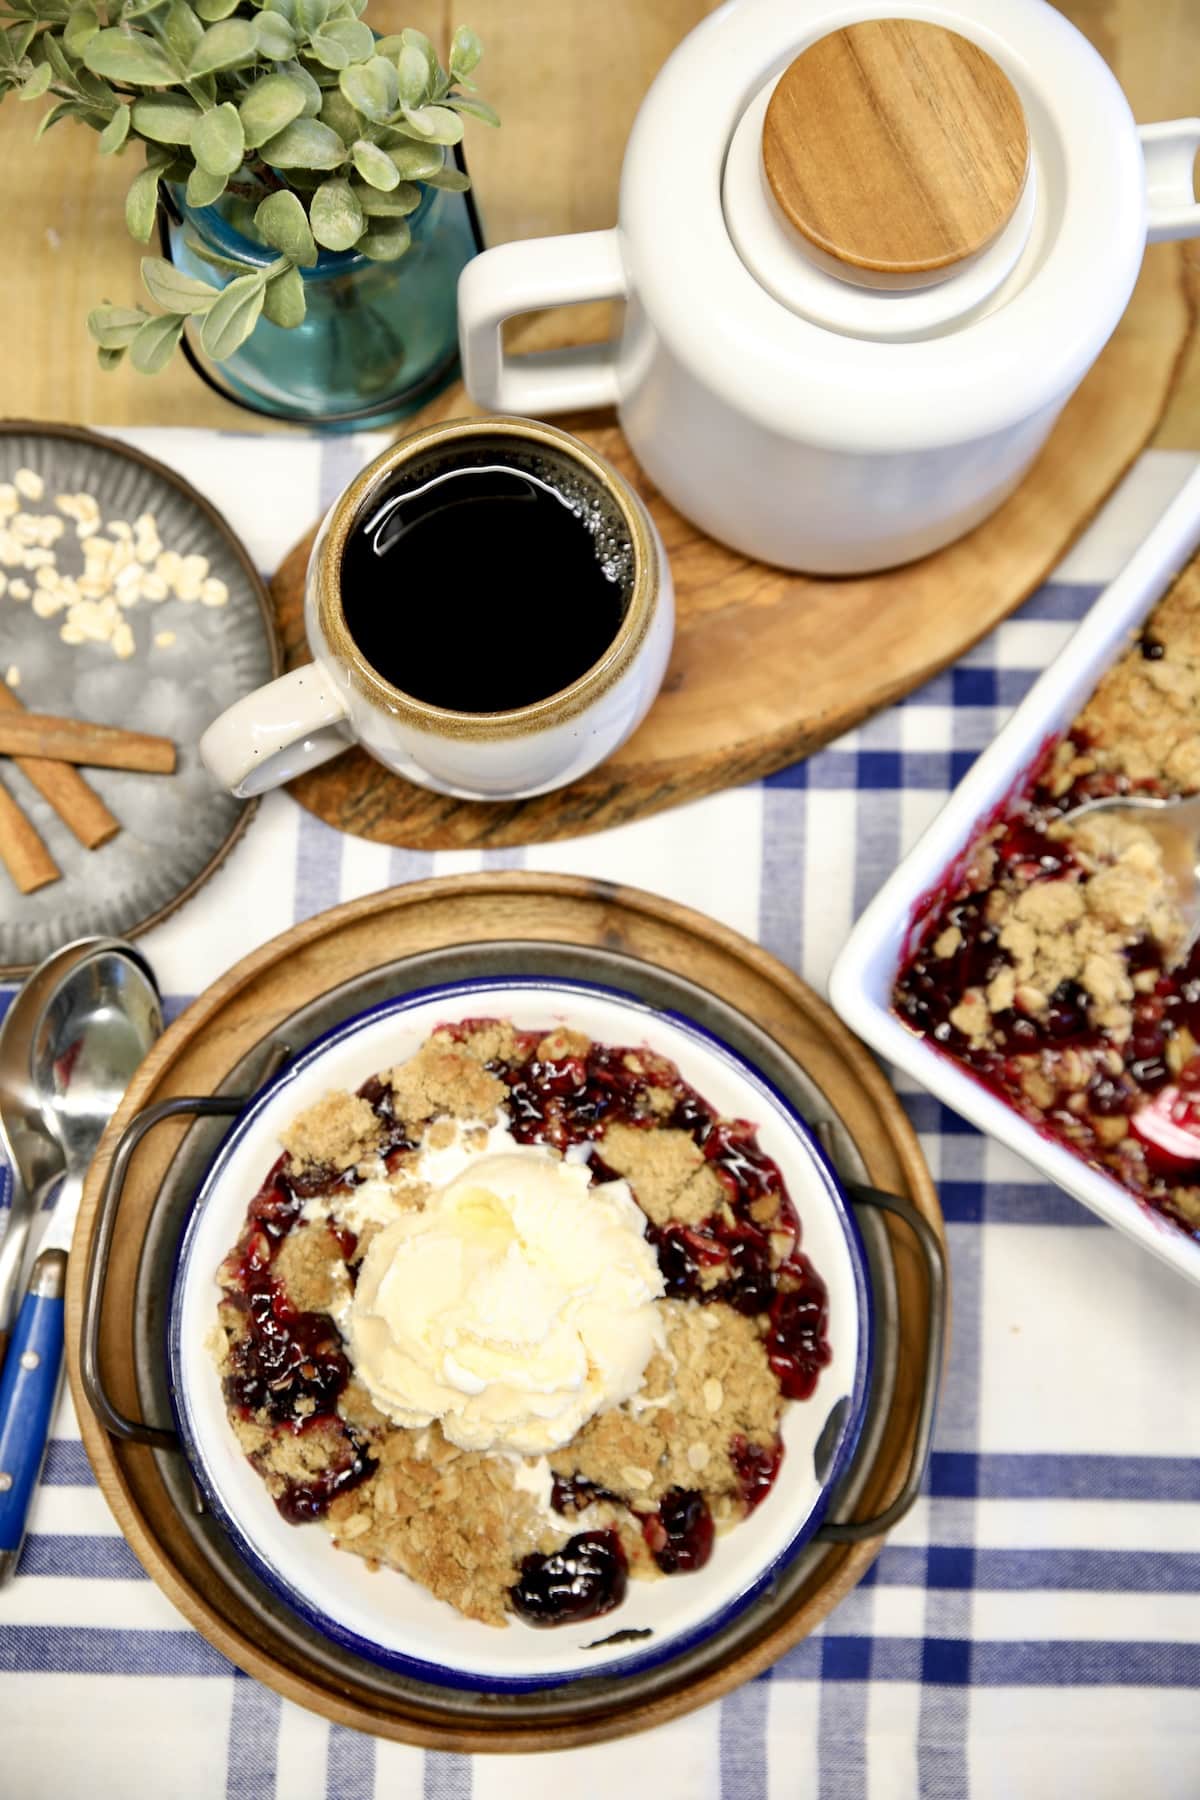 Blueberry Crisp with vanilla ice cream on a plate, cup of coffee, coffee pot.